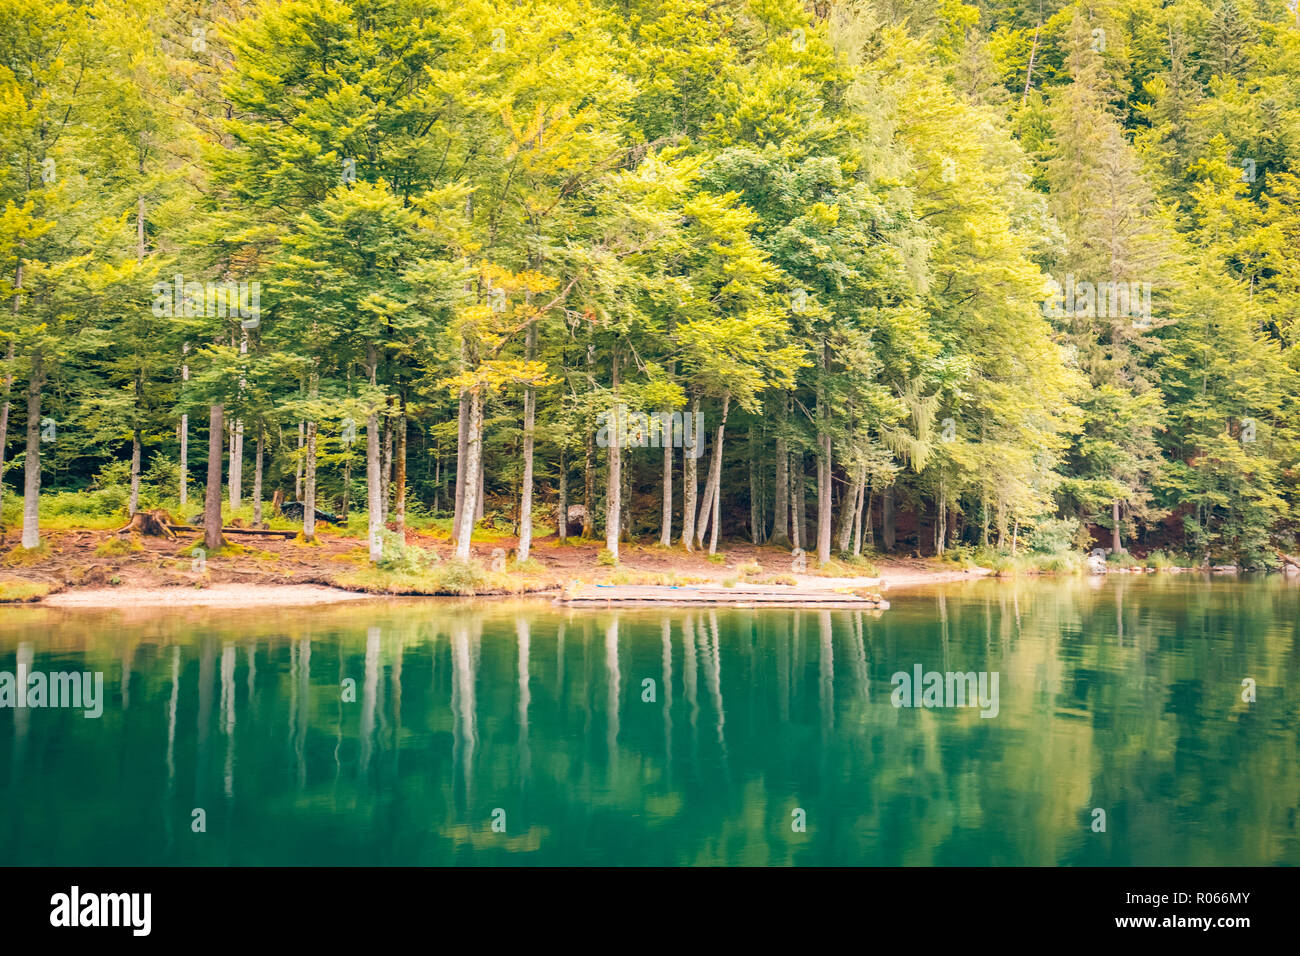 Beautiful trees, lake reflection, tranquil nature. Forest and mountain pass, relaxing scenery. Artistic nature background, trees and lake view Stock Photo